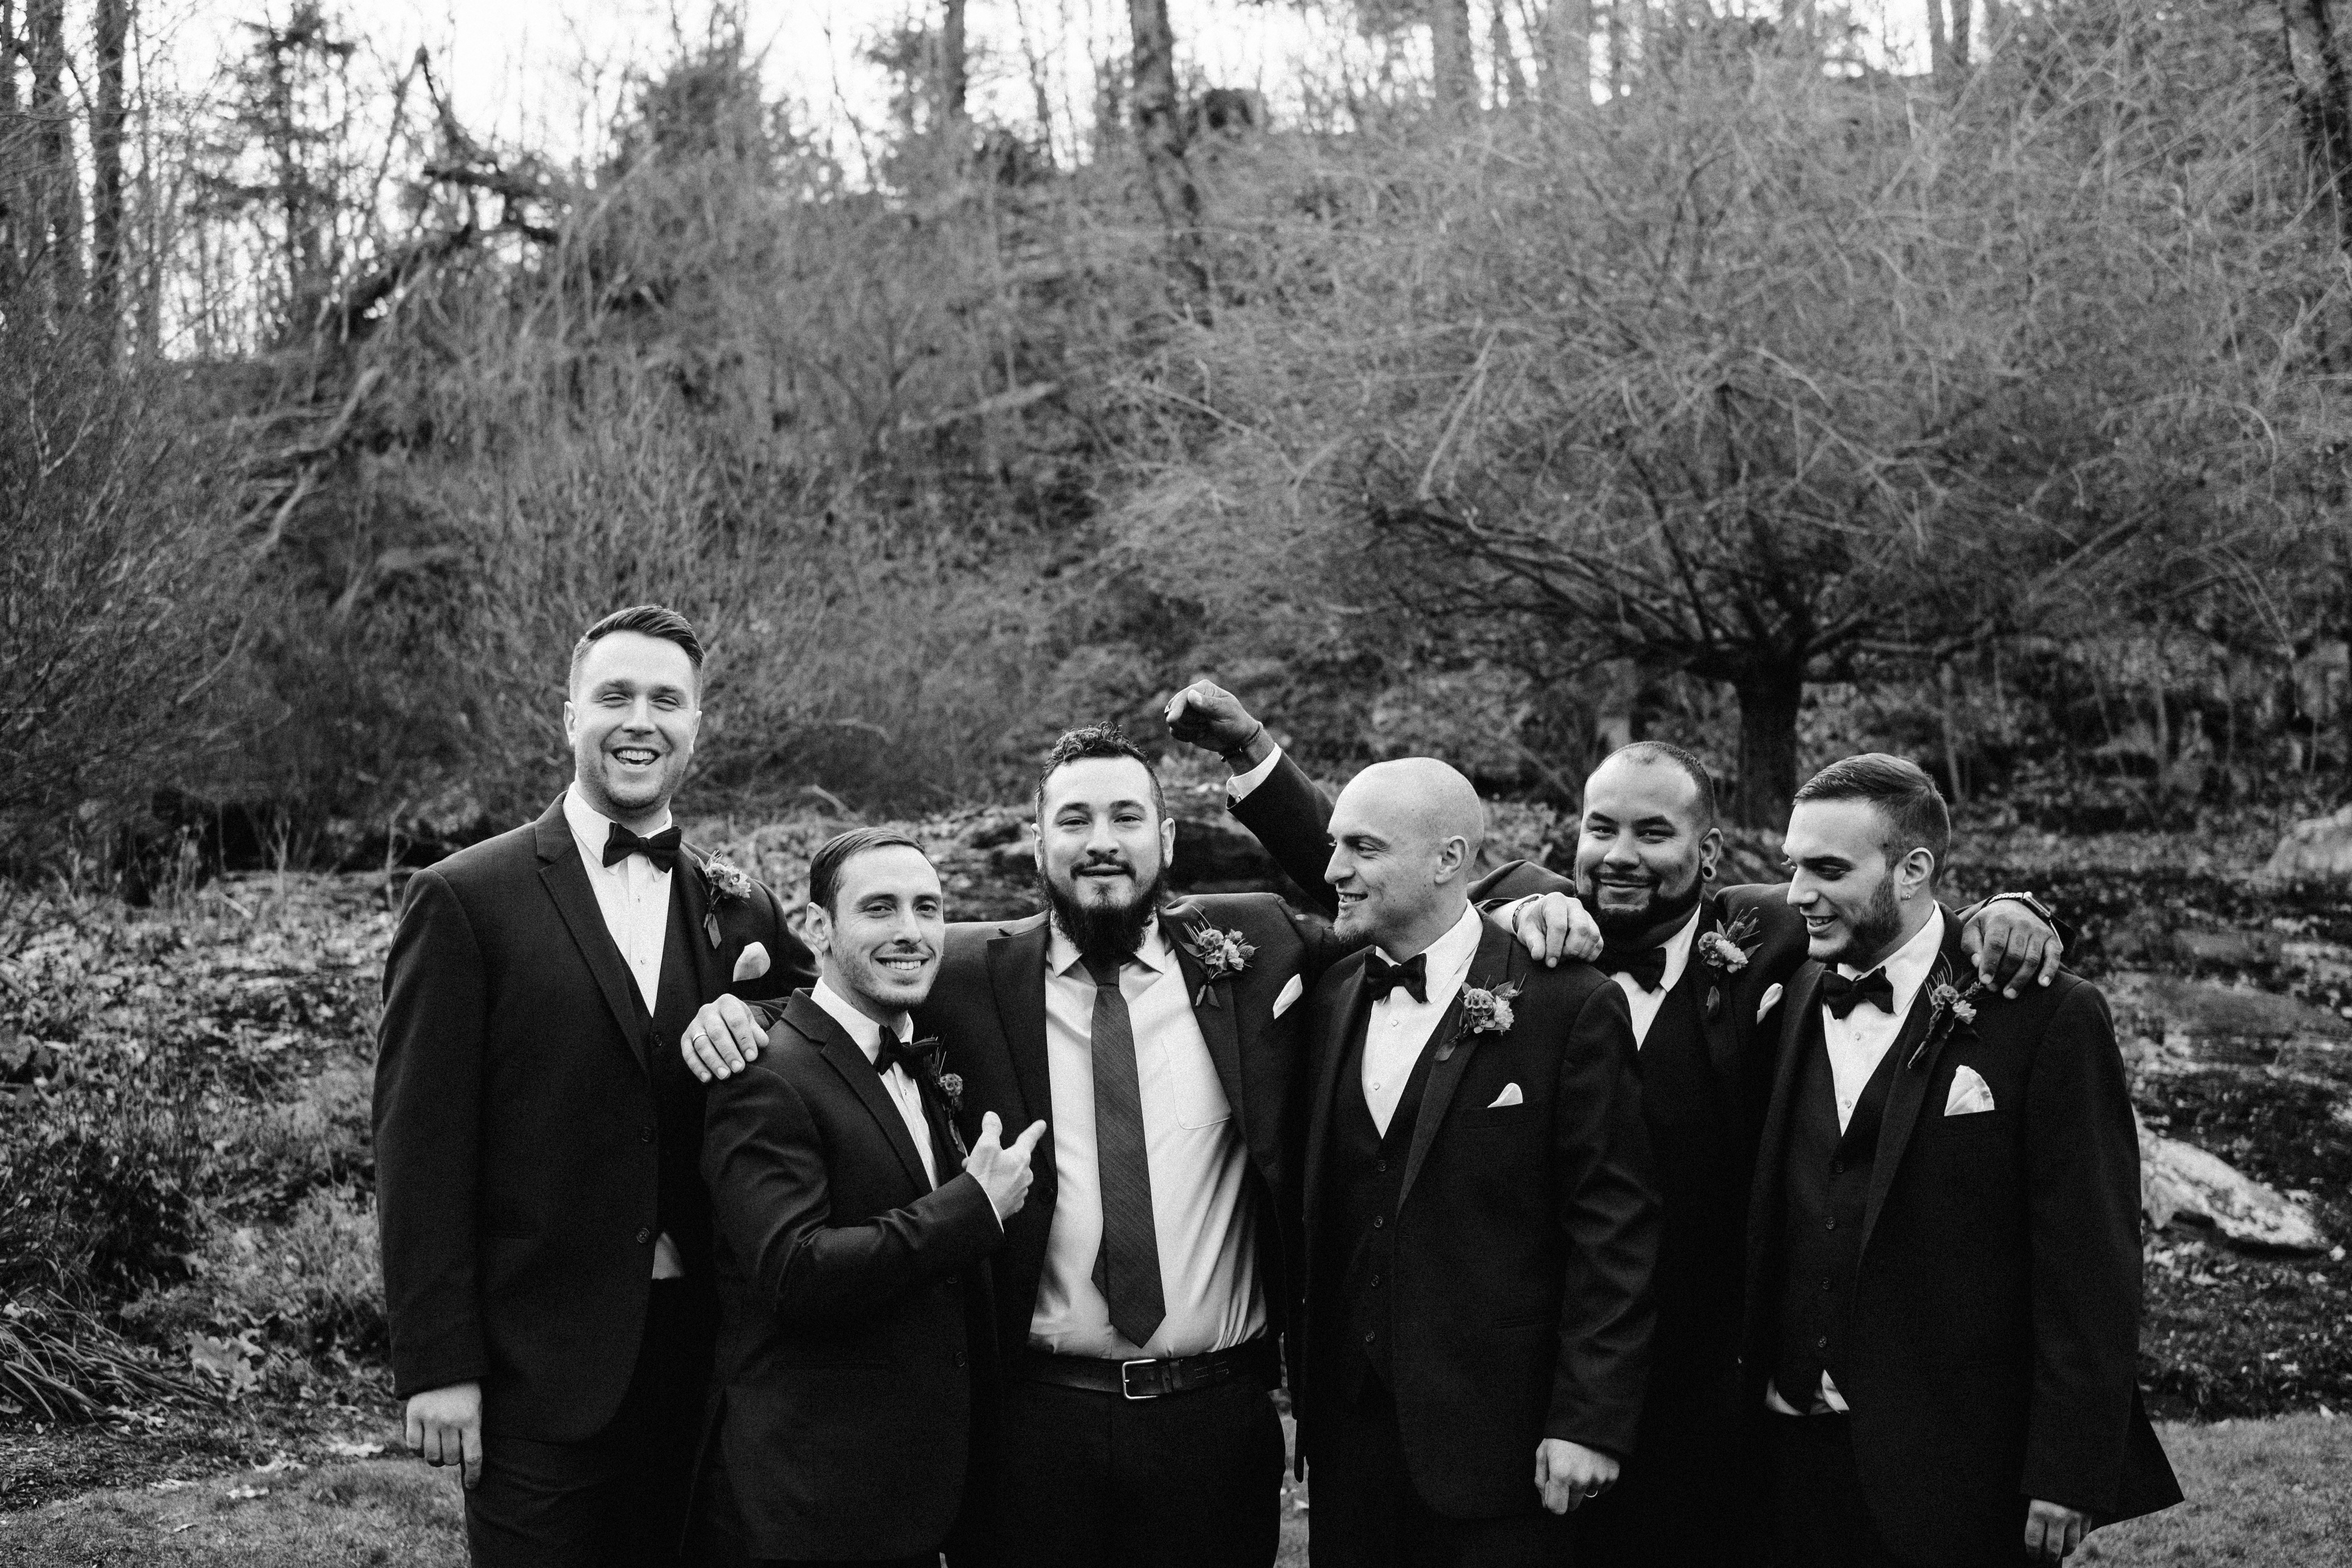 Groomsmen and Groom pose together in Sturbridge MA wedding | A Photographer's Guide to Your Wedding Day Timeline